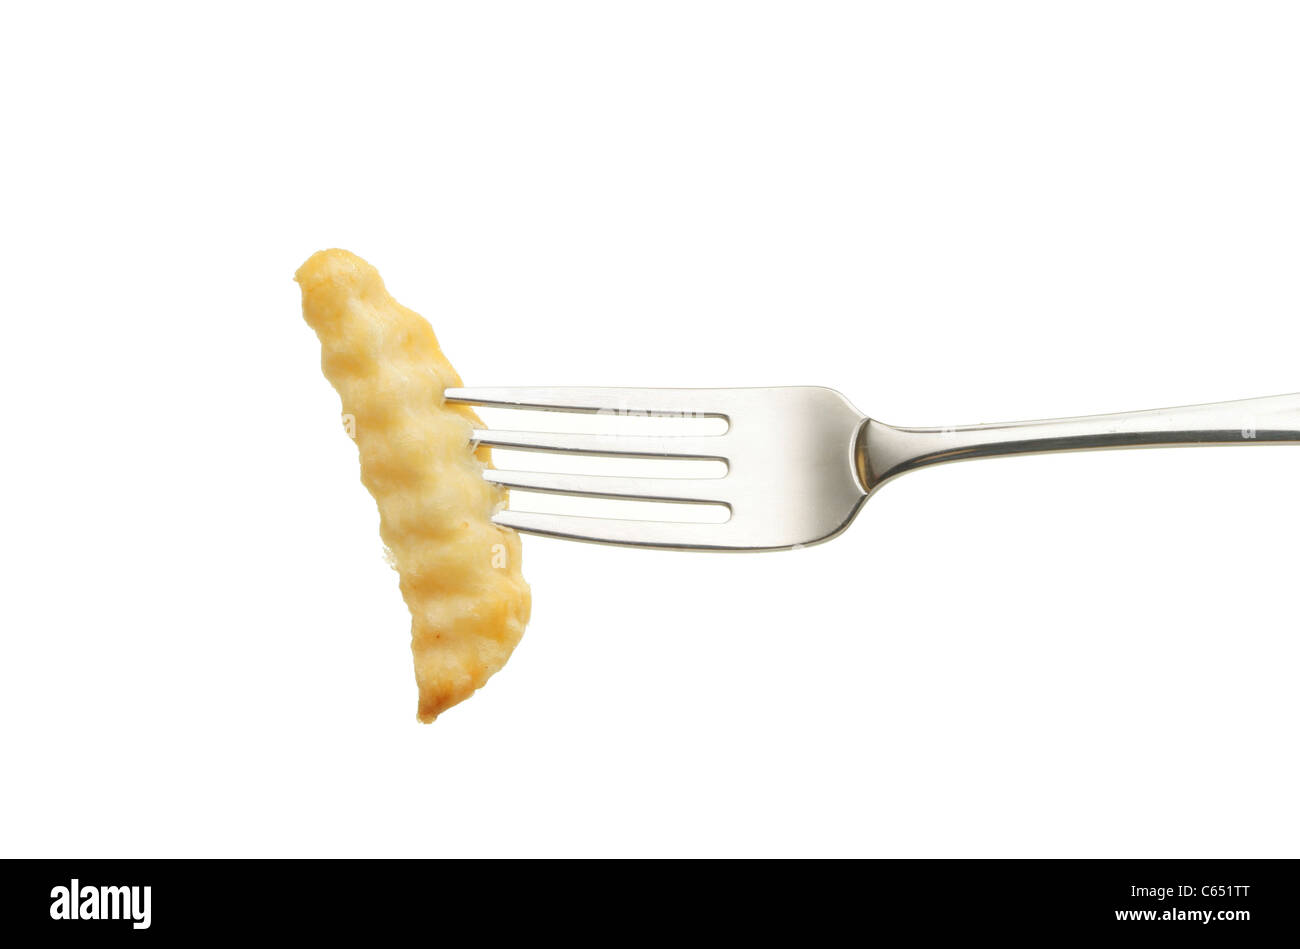 Crinkle cut potato chip on a fork isolated against white Stock Photo